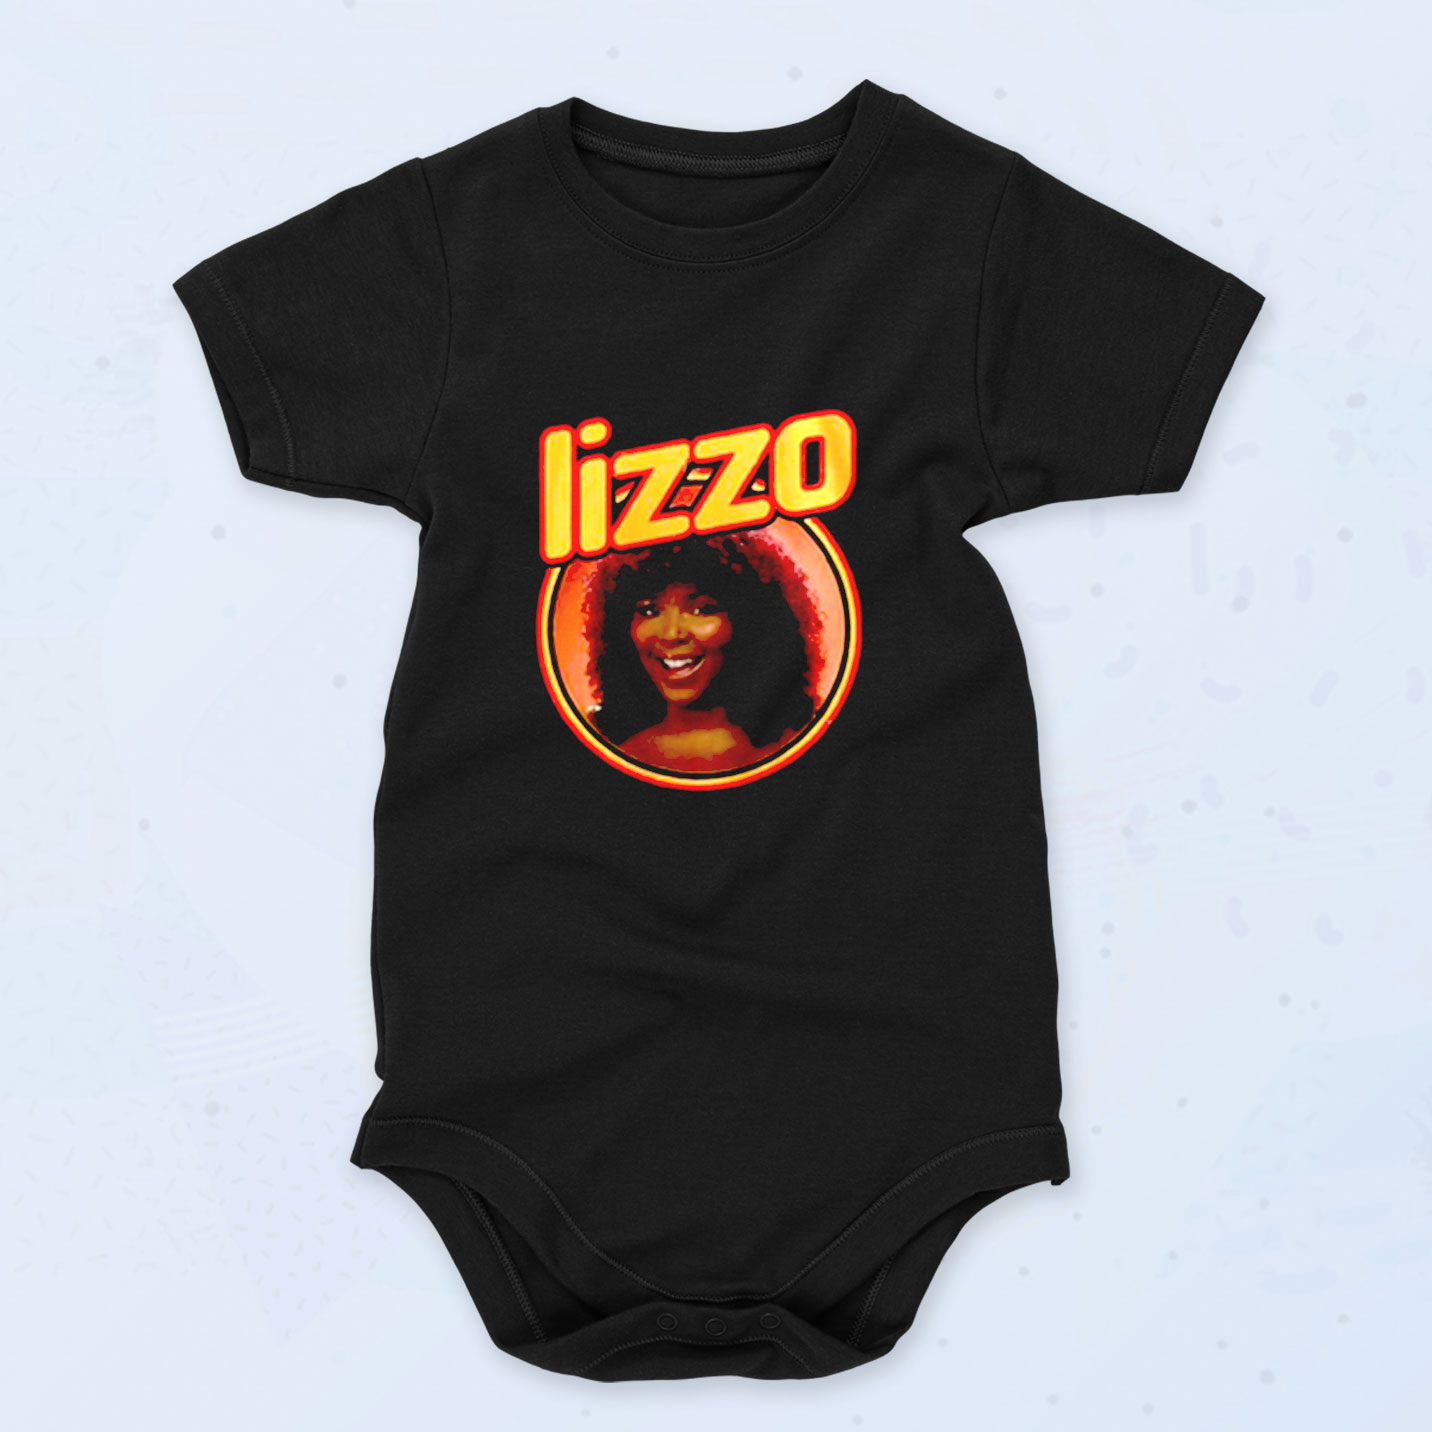 Lizzo Juice Girl Rapper Baby Onesies Style, Baby Clothes 